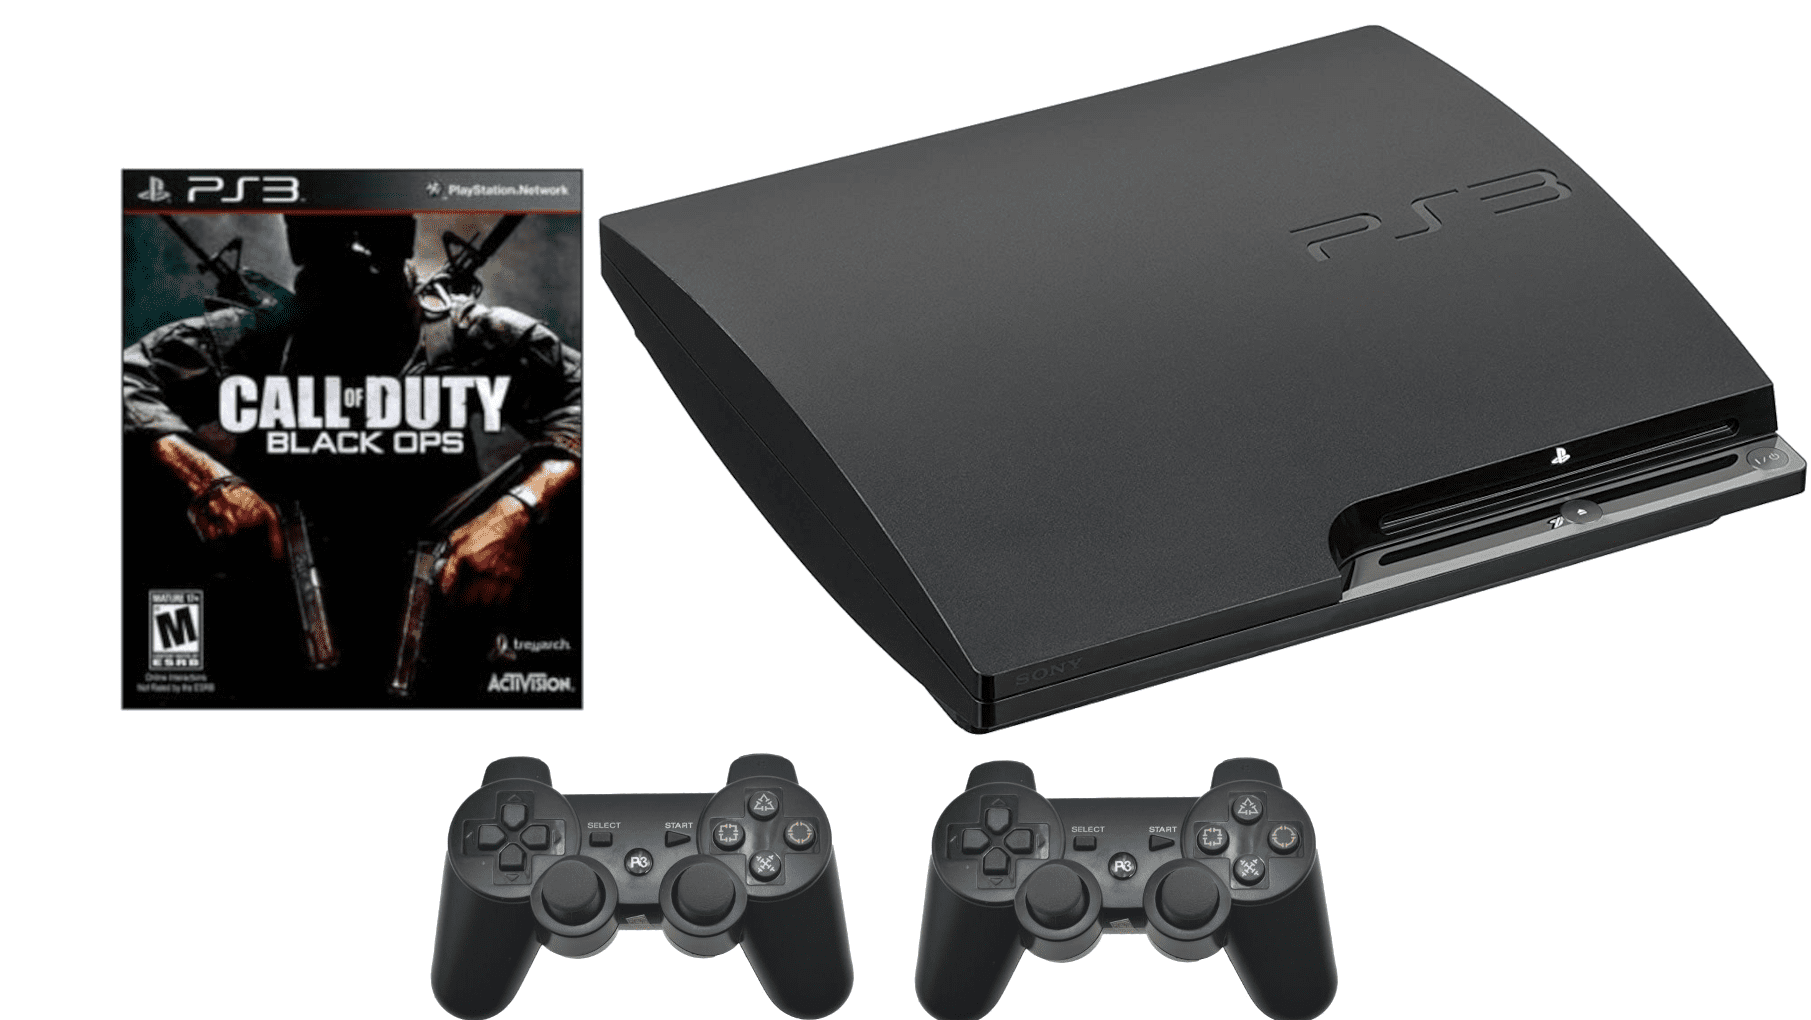 correct Credentials Holdall Used Sony PlayStation 3 PS3 Slim Console - 2 Controllers - Black Ops Bundle  - Walmart.com